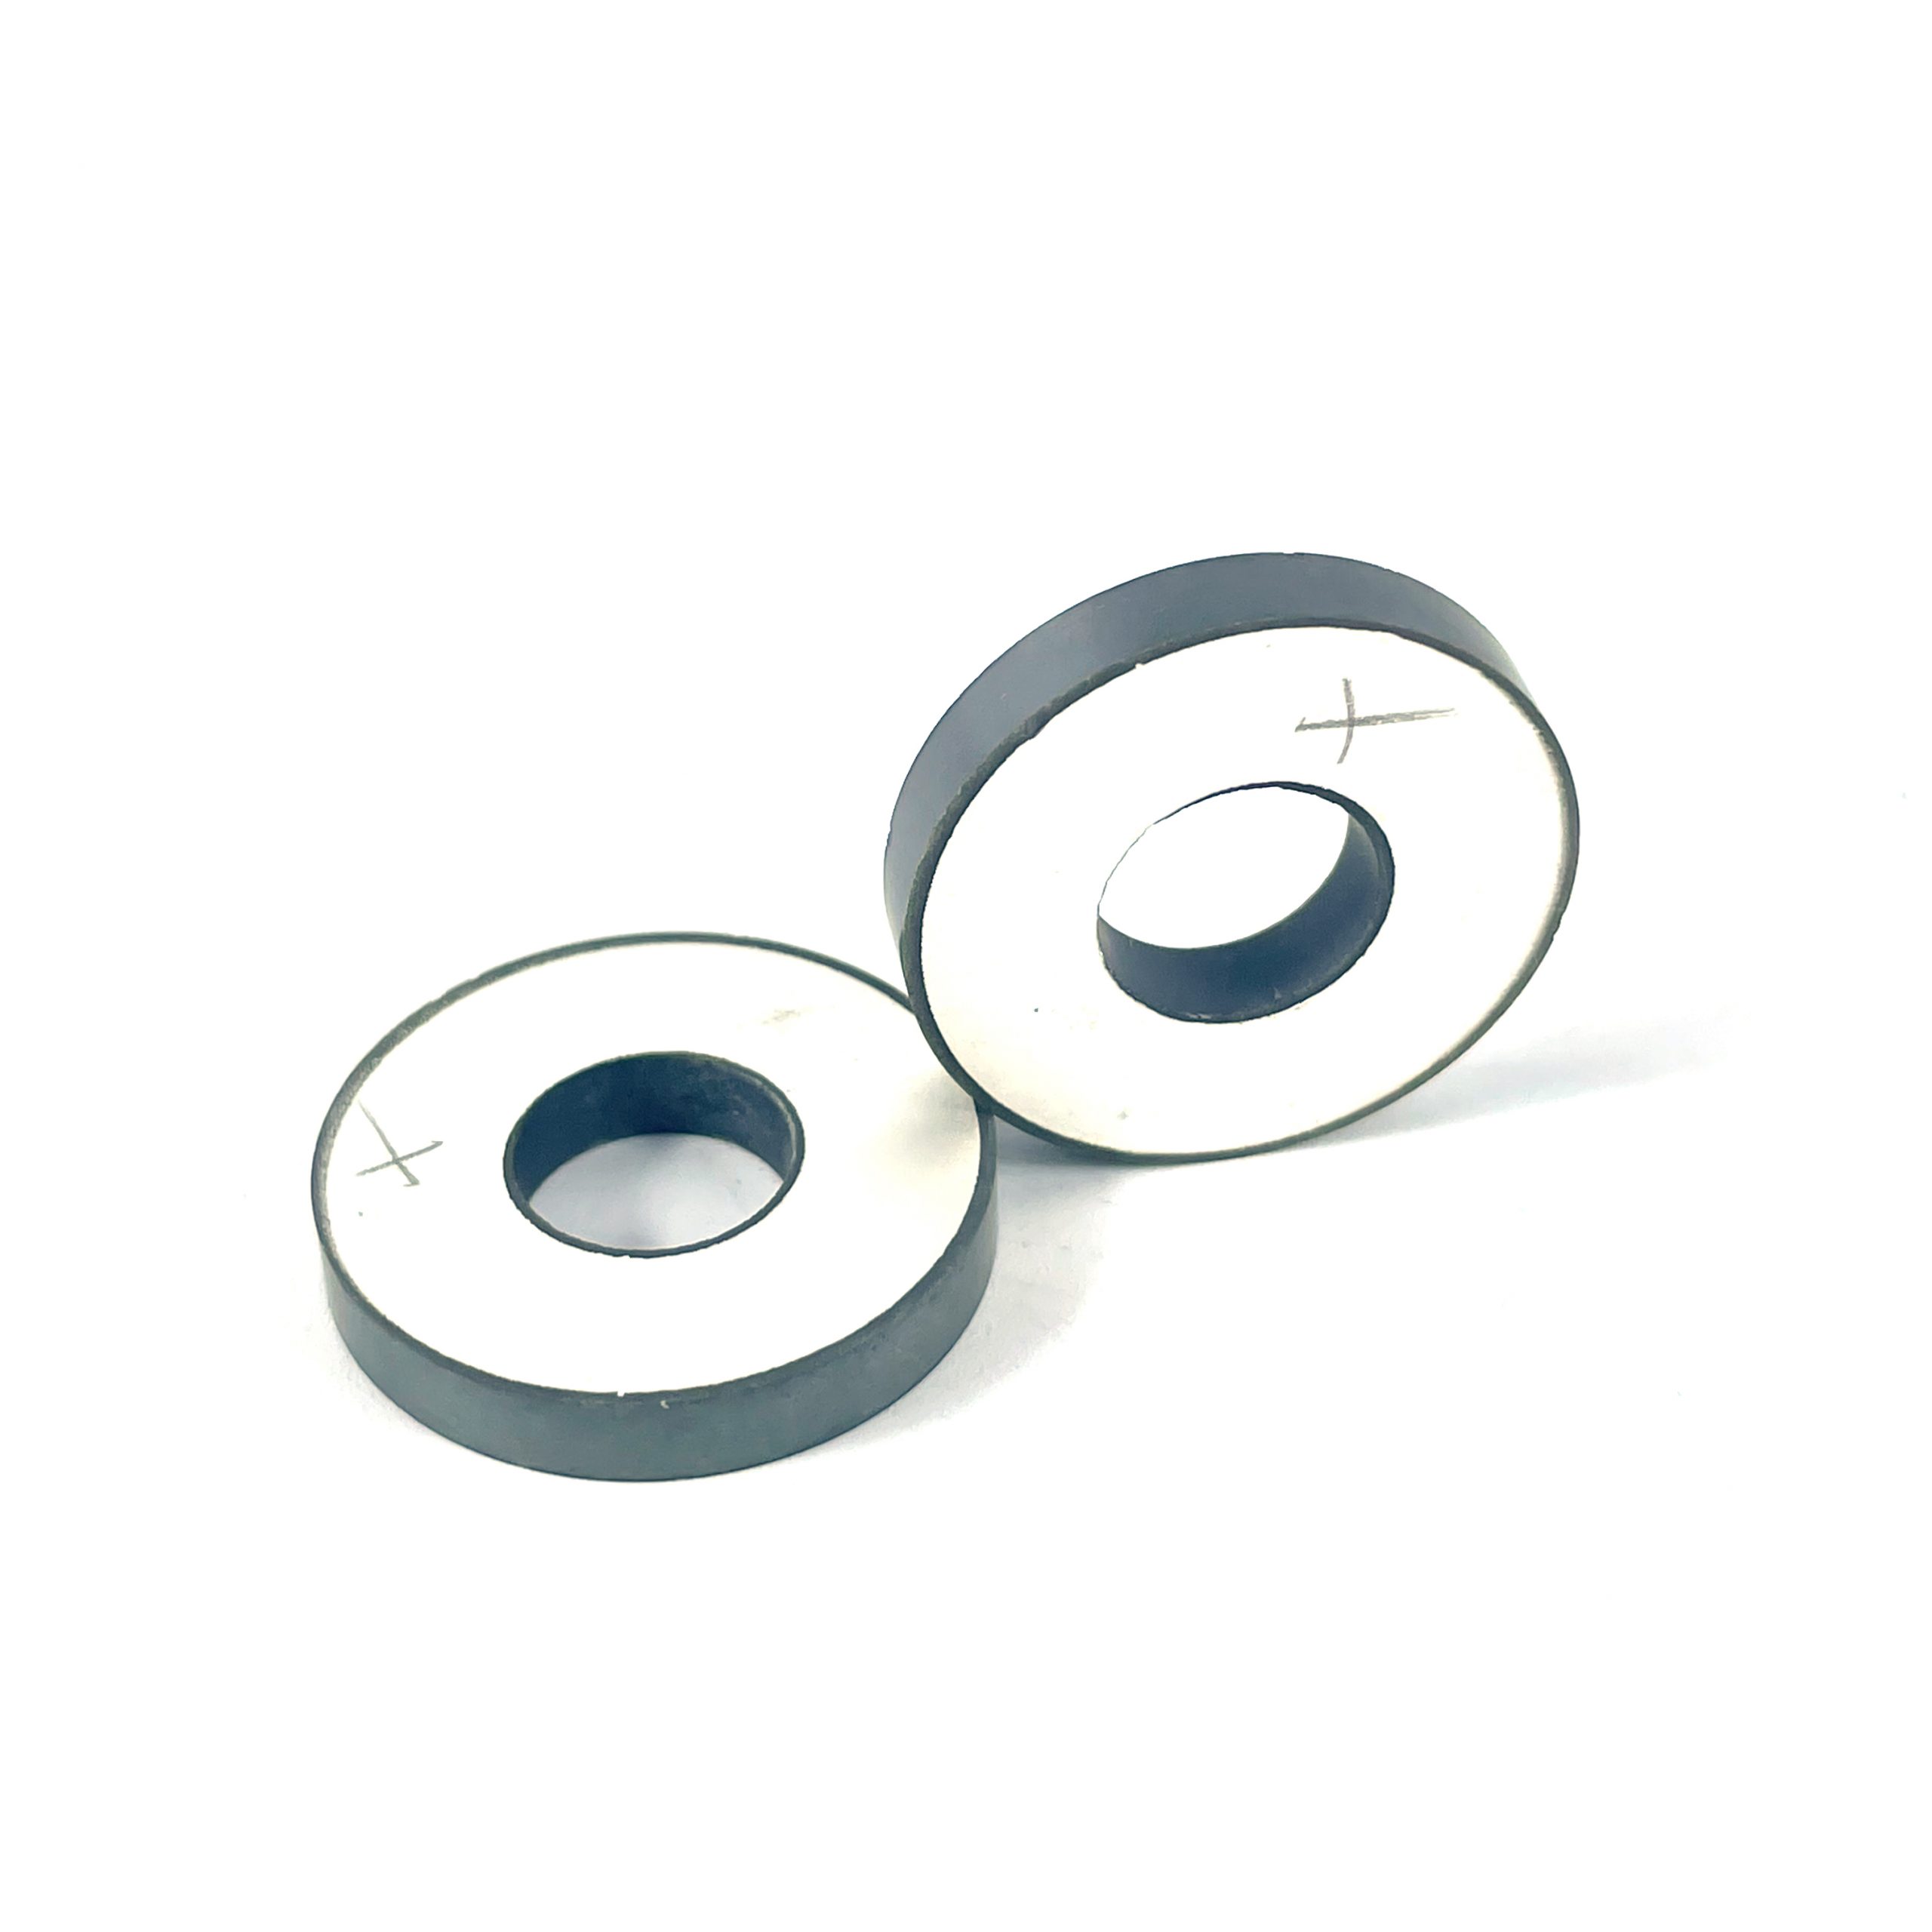 PZT-8 PZT-4 Material Piezoelectric Ceramic Ring/Disc/Sheet for Ultrasonic Transducer